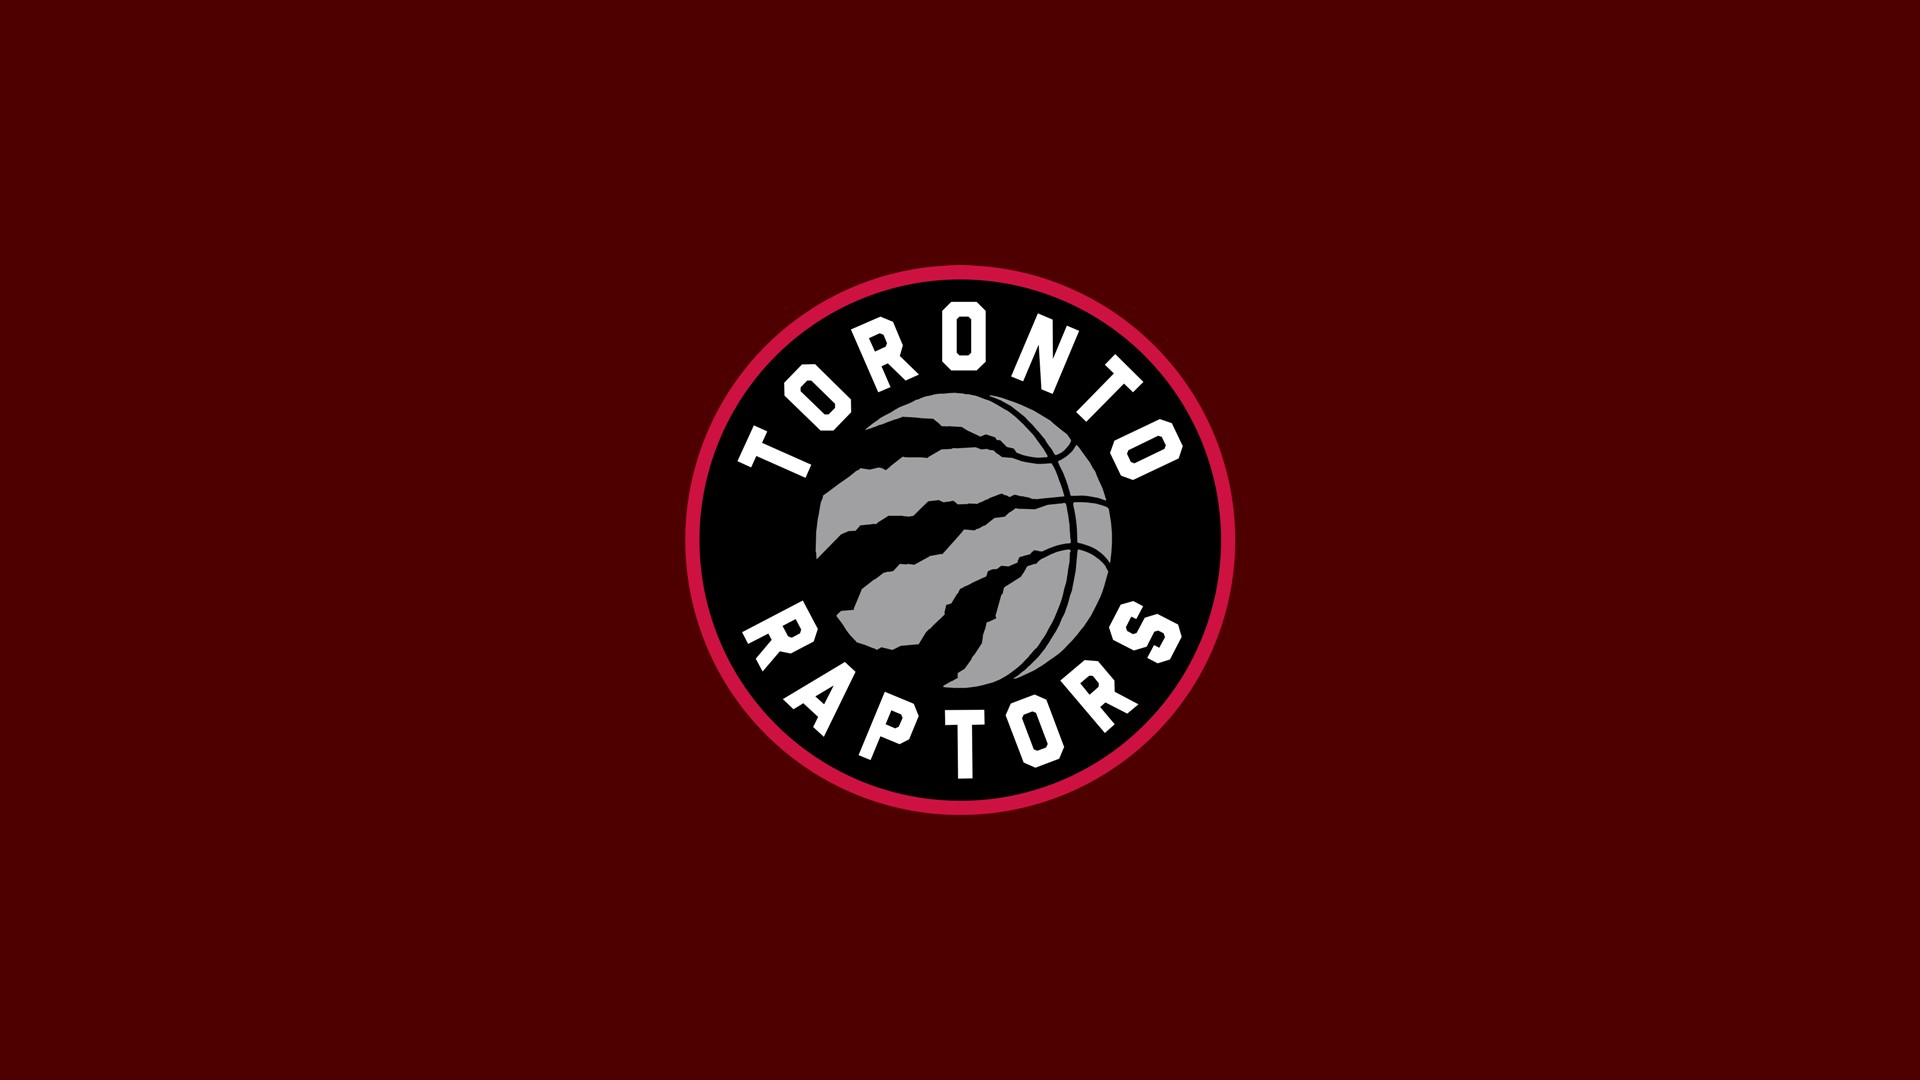 Wallpapers HD Basketball Toronto with image dimensions 1920x1080 pixel. You can make this wallpaper for your Desktop Computer Backgrounds, Windows or Mac Screensavers, iPhone Lock screen, Tablet or Android and another Mobile Phone device